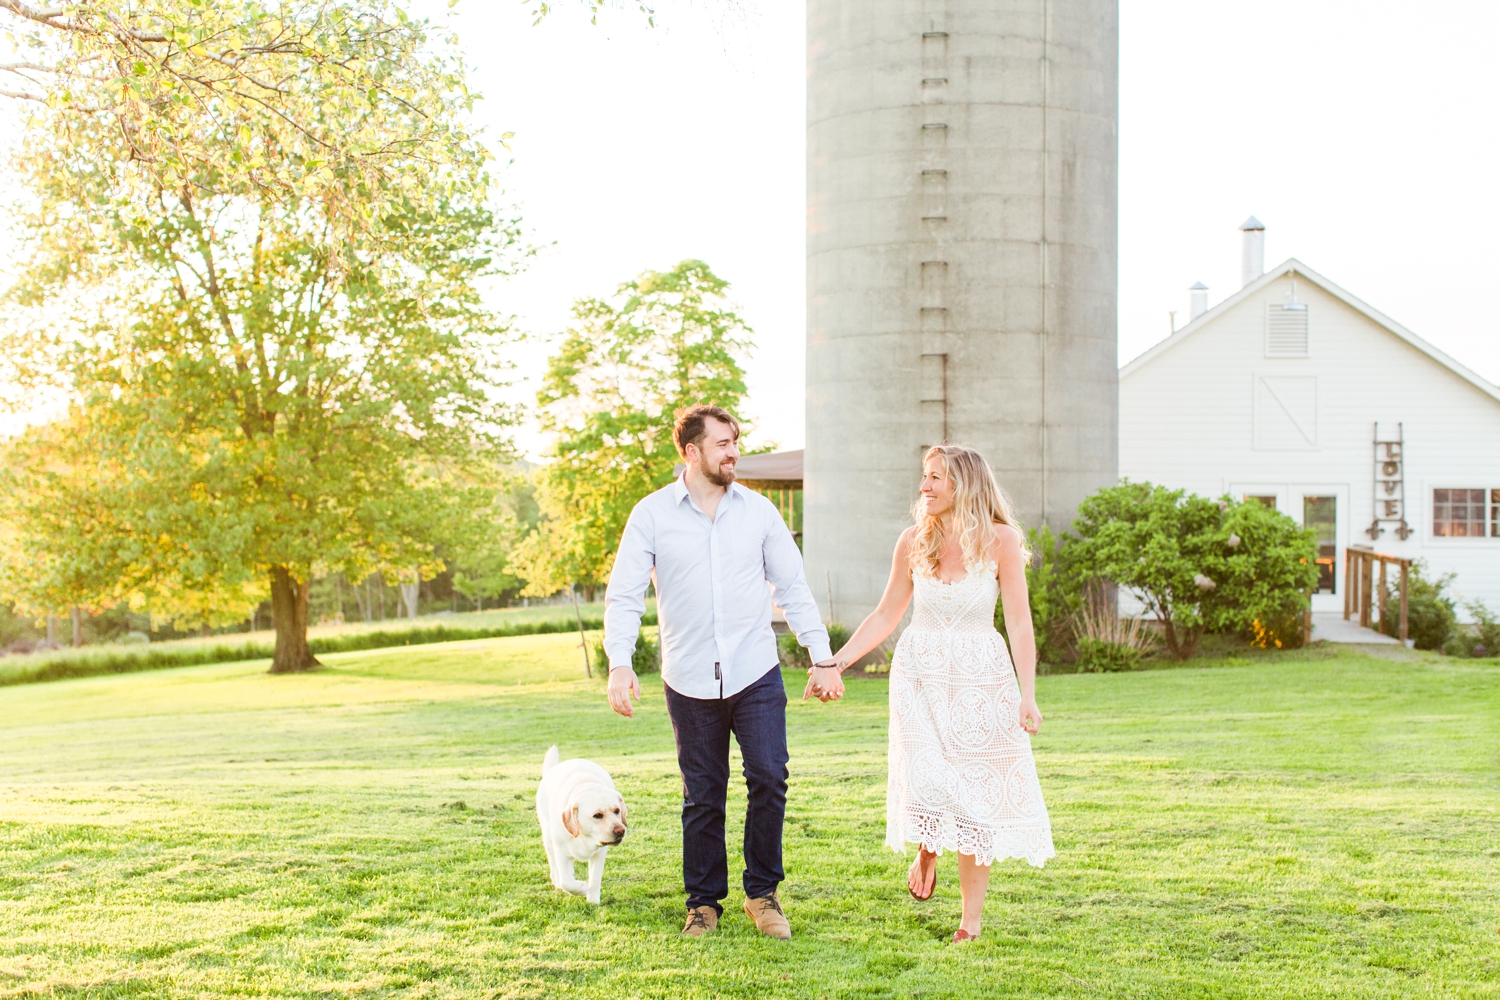 candlelight-farms-inn-engagement-session-new-milford-connecticut-wedding-photographer-shaina-lee-photography-photo